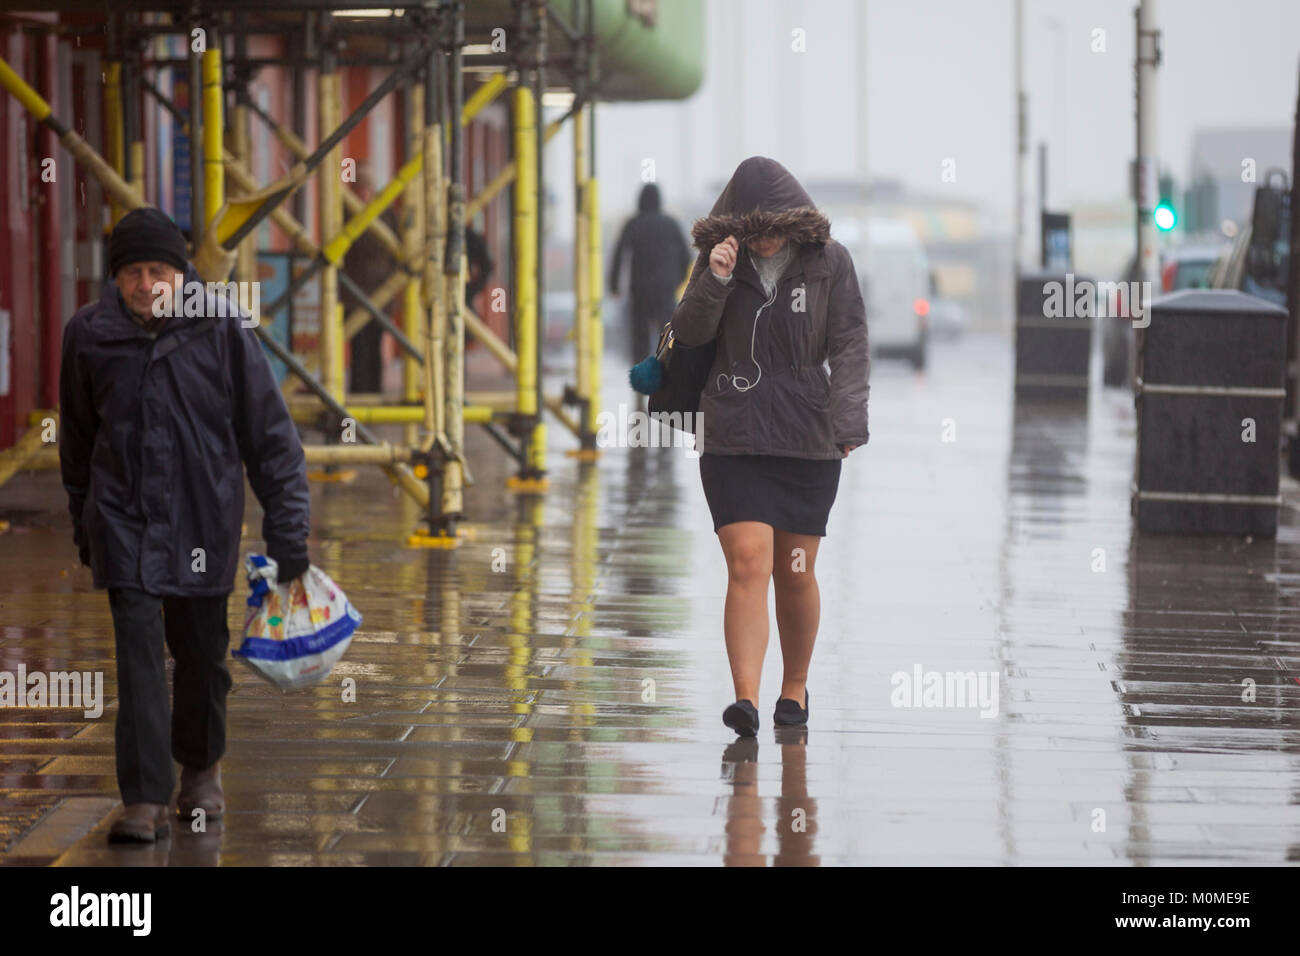 Hastings, East Sussex, UK. 23rd Jan, 2018. Raining in Hastings with low visibility on the roads making driving conditions difficult. Lots of people walking about in the rain which shows no signs of stopping. This woman adjusts her hood to keep out the rain. Photo Credit: Paul Lawrenson/Alamy Live News Stock Photo